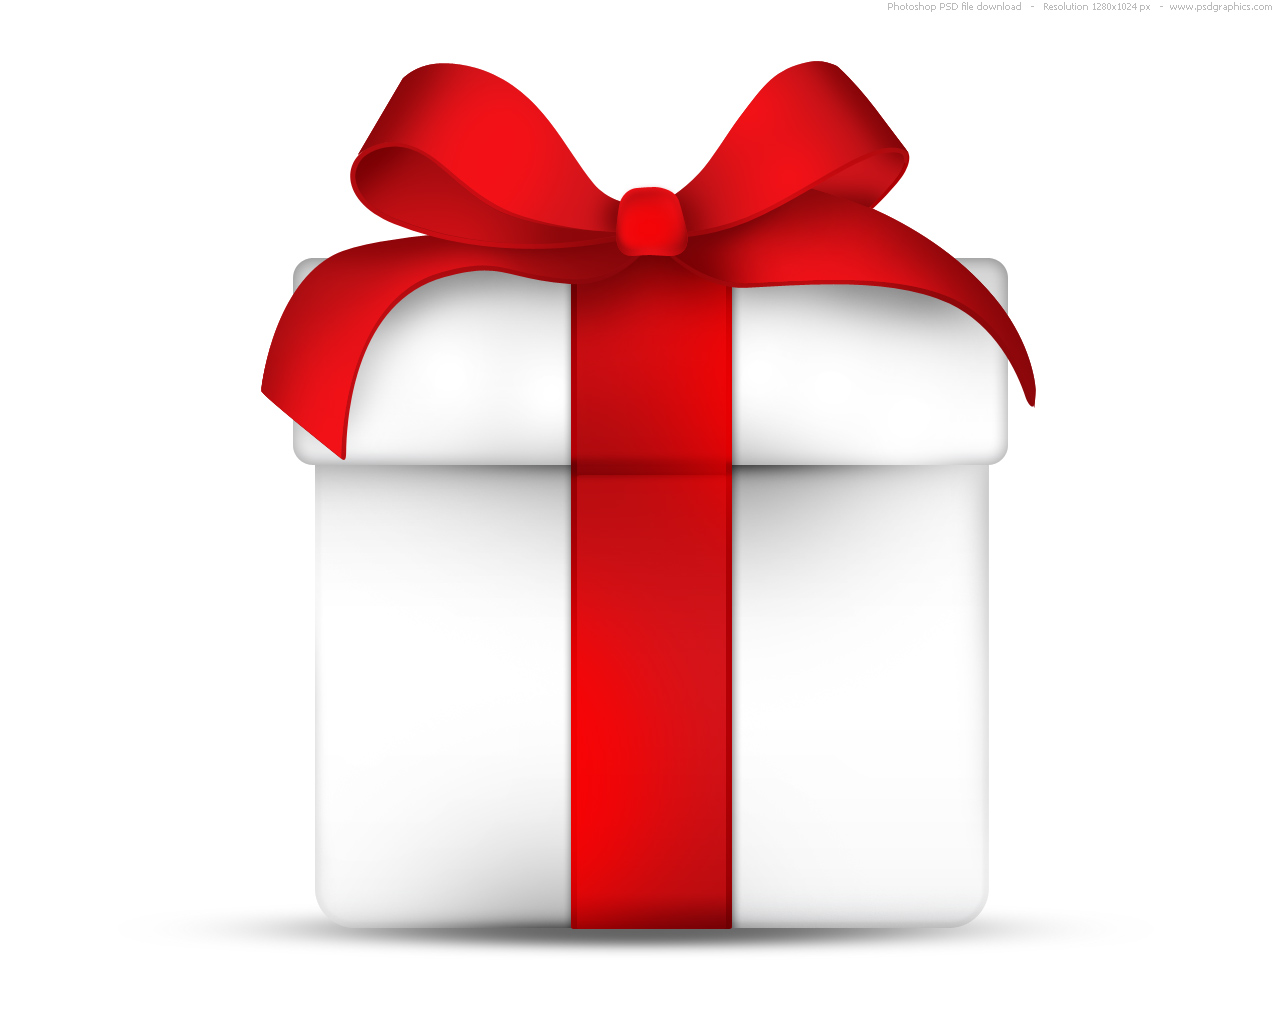 Christmas Present Images - ClipArt Best